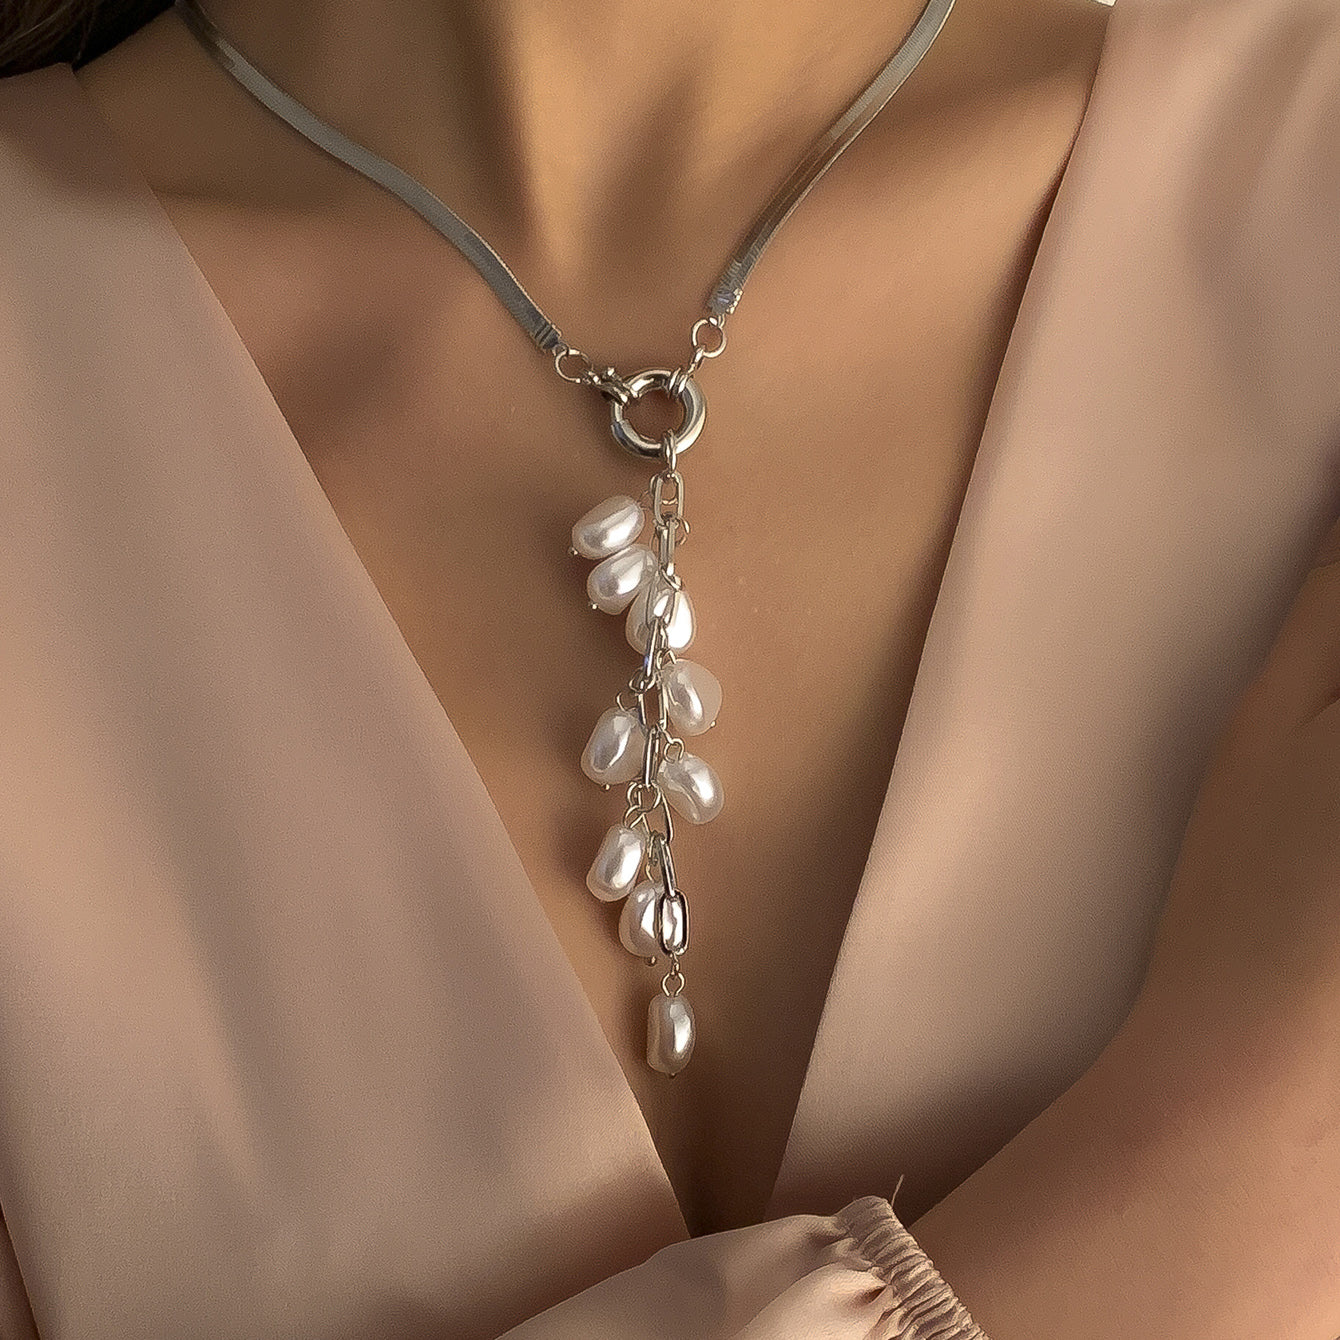 Gorgeous Faux Pearl Pendant Necklace - Add a Touch of Elegance to Your Look!